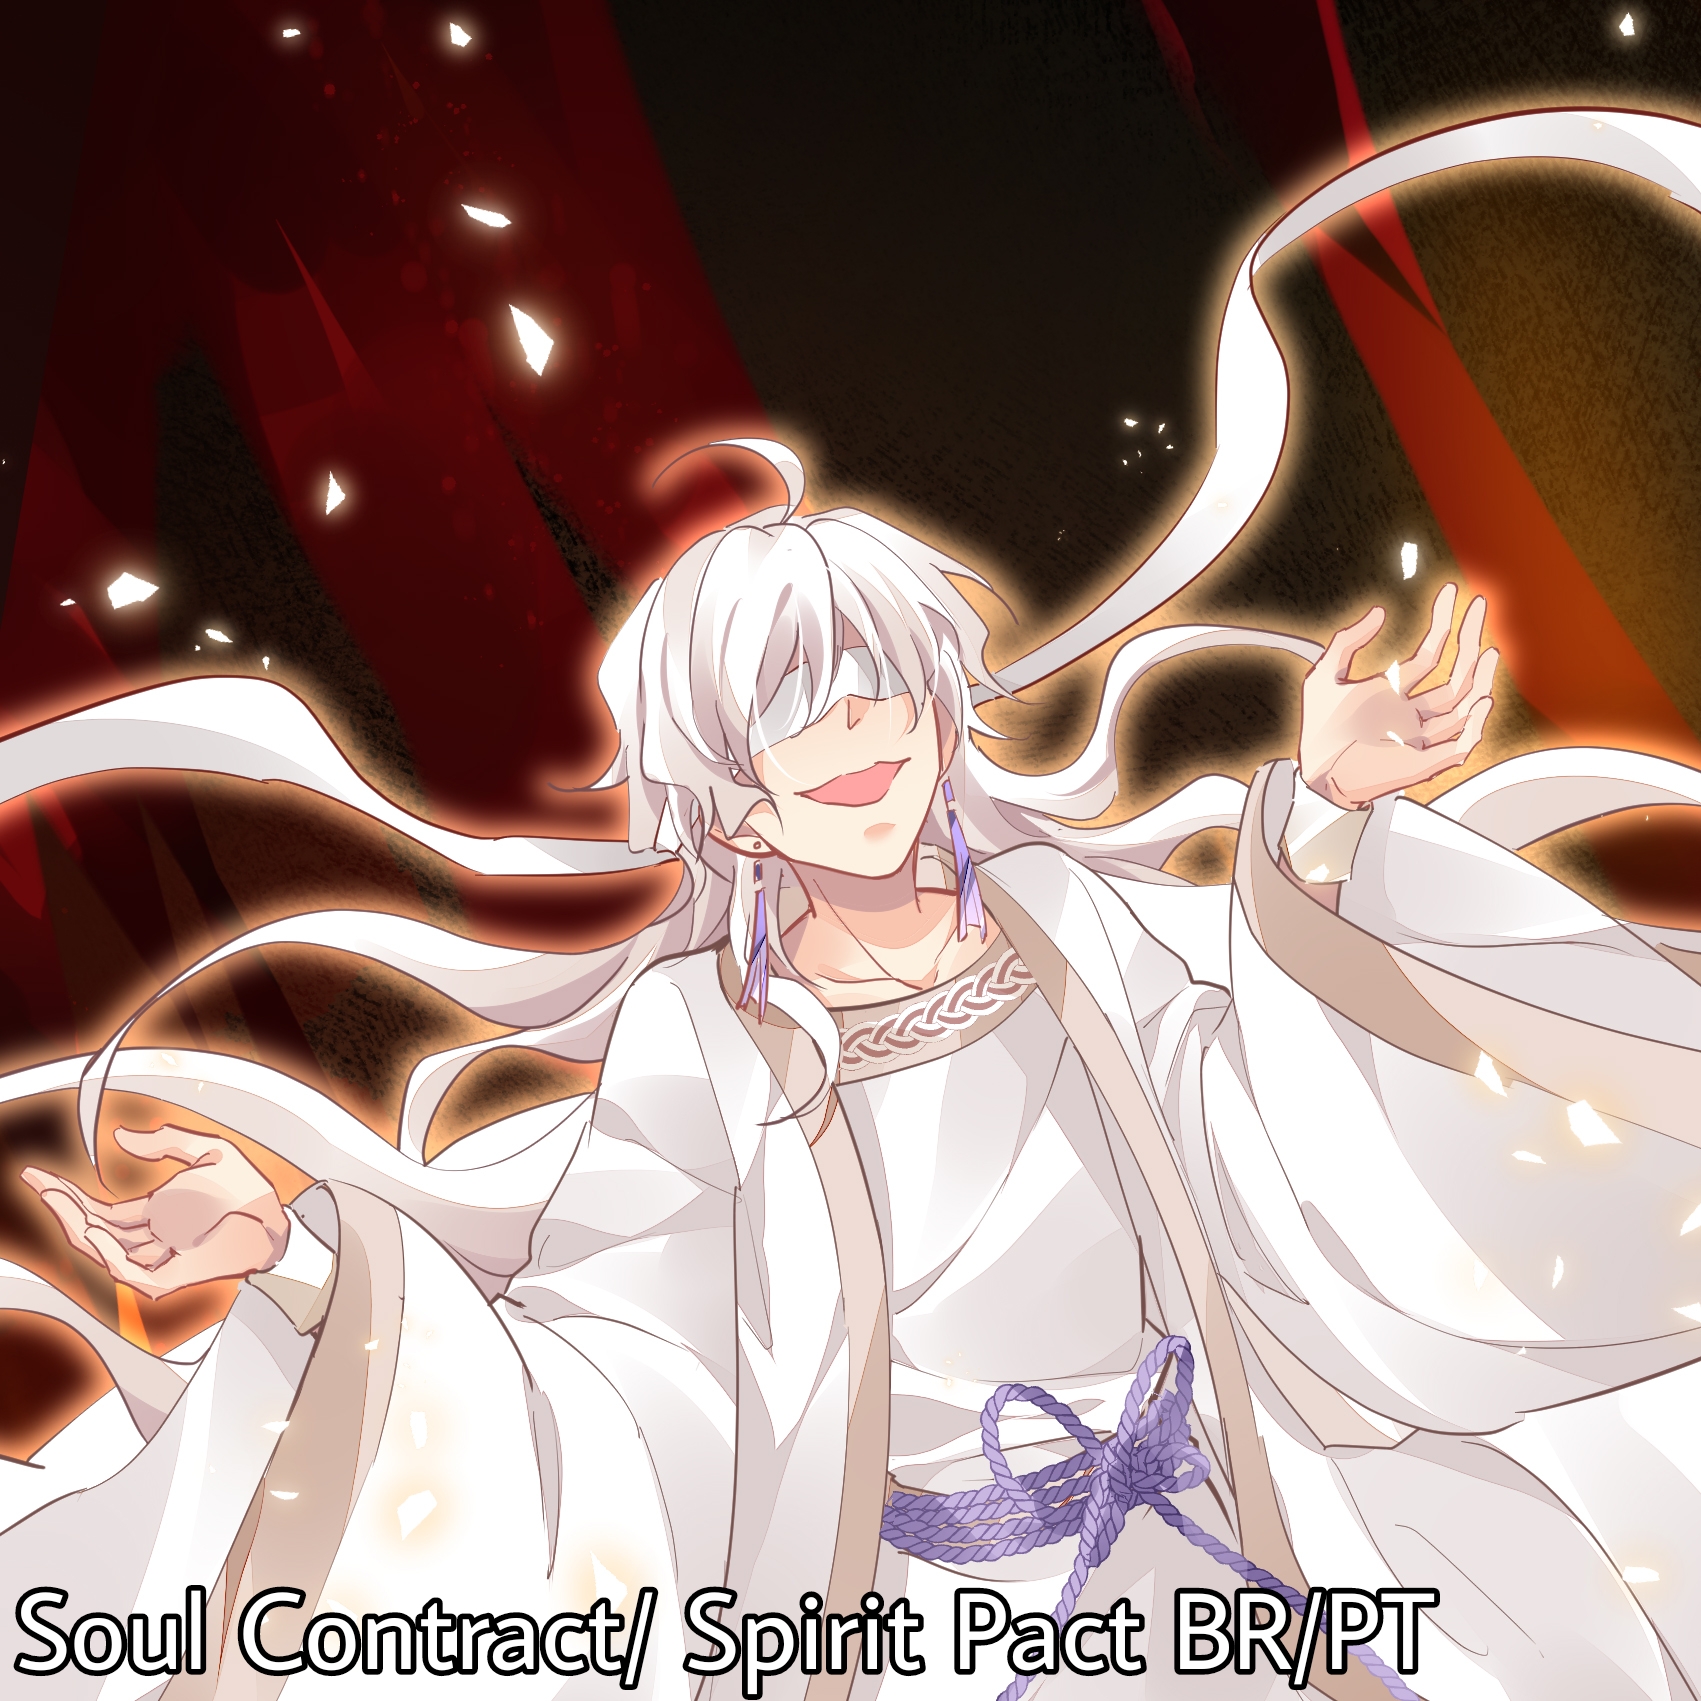 Soul Contract/ Spirit Pact BR/PT